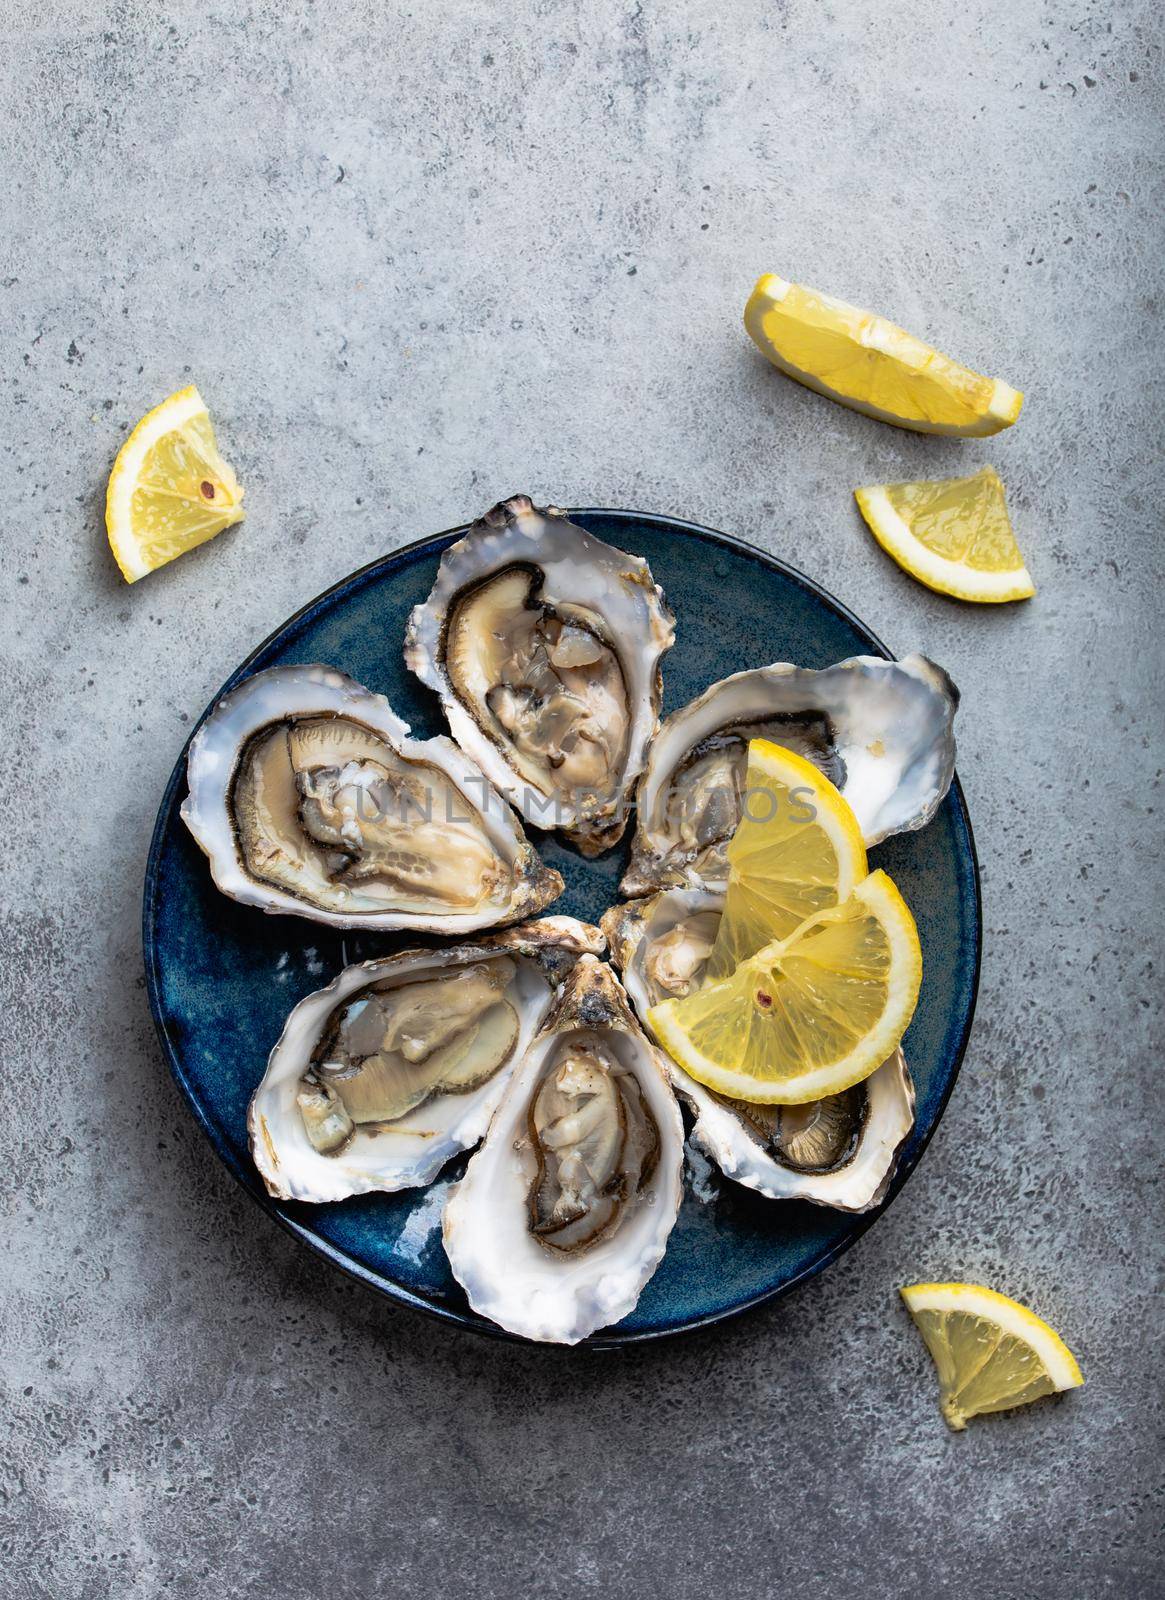 Set of half dozen fresh opened oysters in shell with lemon wedges served on rustic blue plate on gray stone background, close up, top view